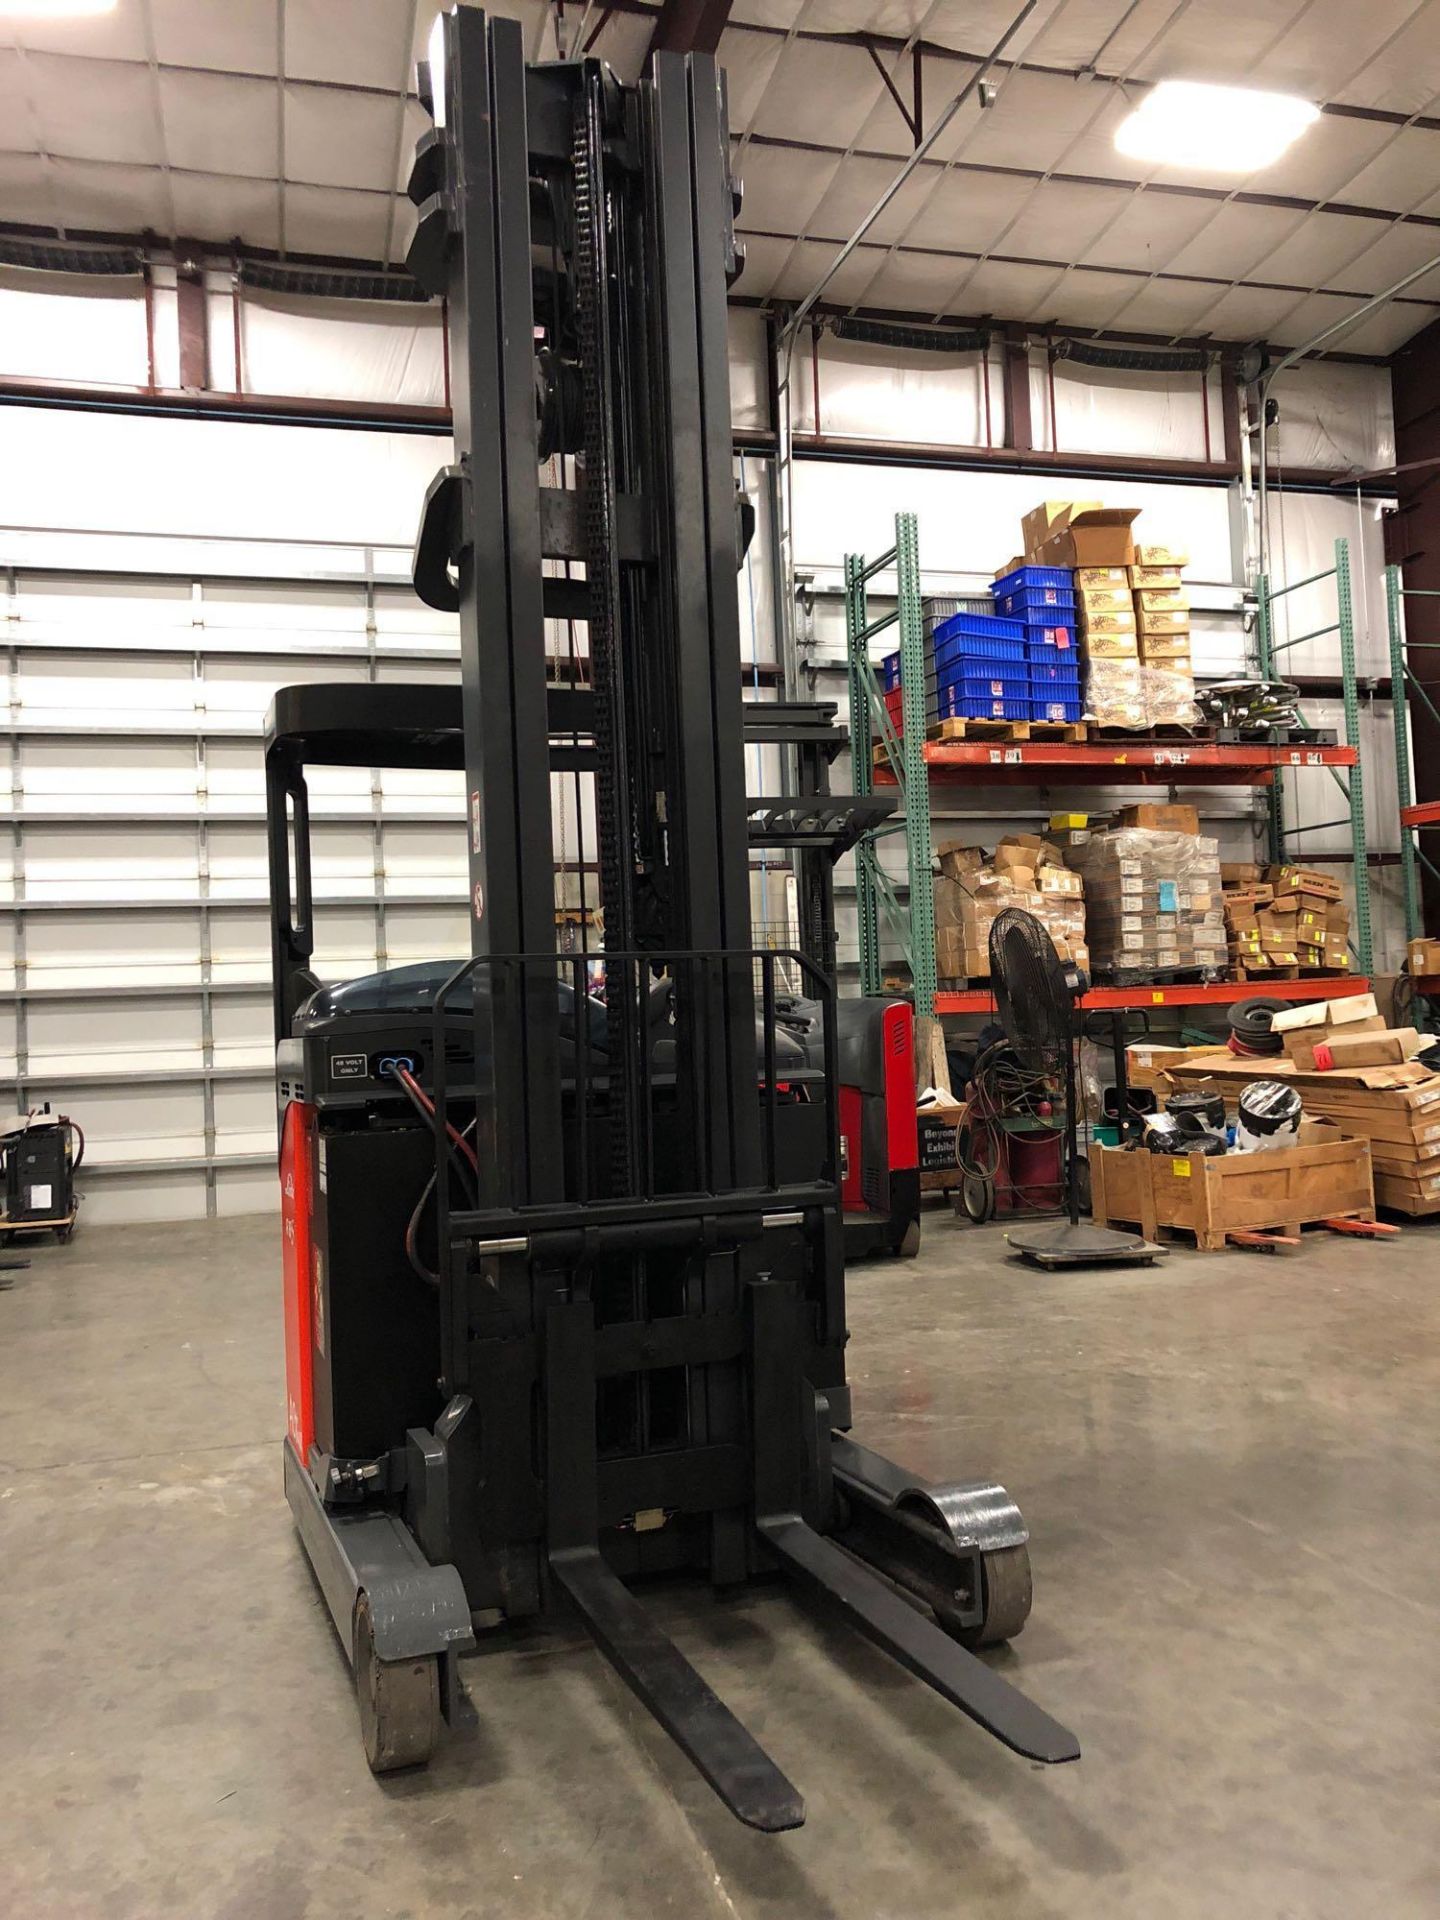 2013 LINDE ELECTRIC FORKLIFT MODEL R16SHD, 3,500 LB WEIGHT CAPACITY, 313" HEIGHT CAP, CAMERA ON MAST - Image 5 of 10